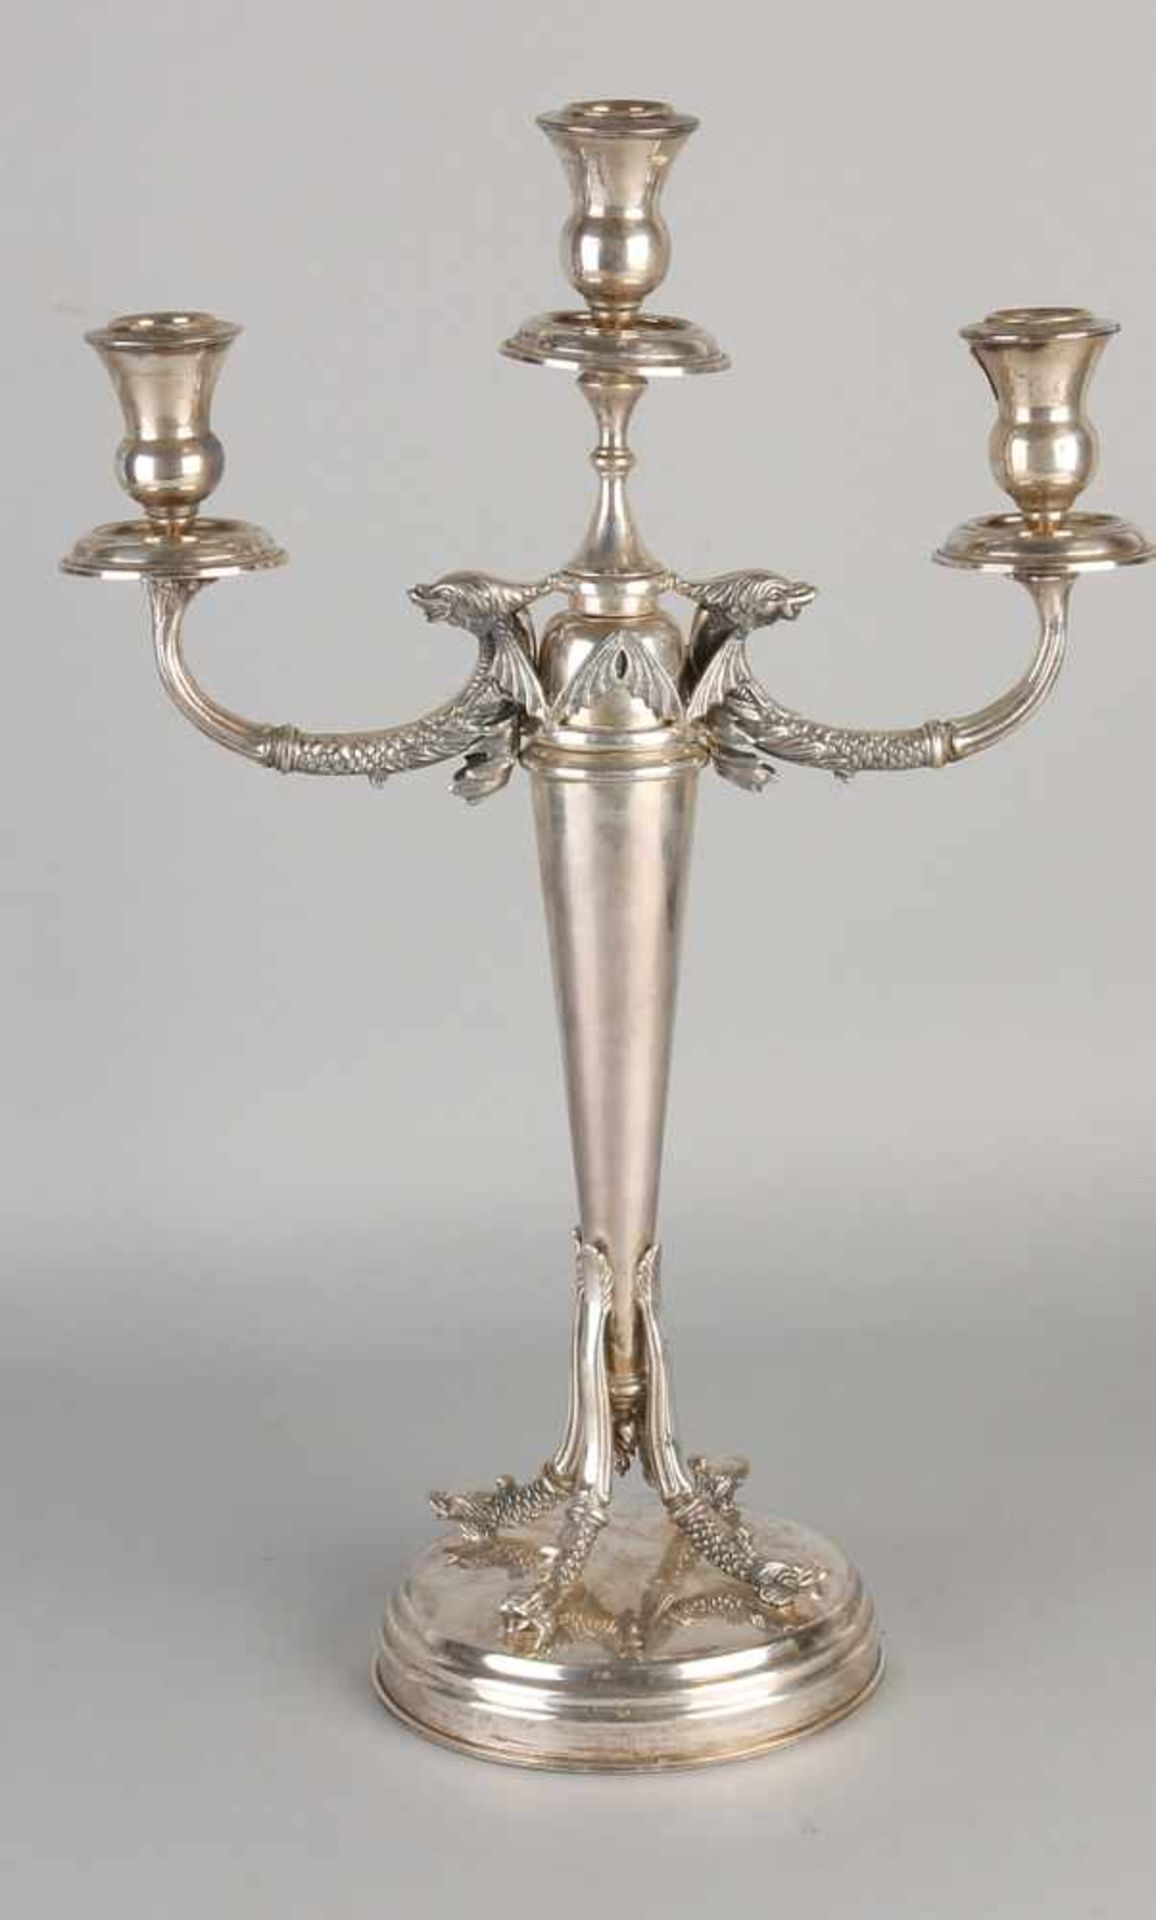 Imposing silver candlestick, 900/000, 3 light, with two arms in the form of winged dolphins. The